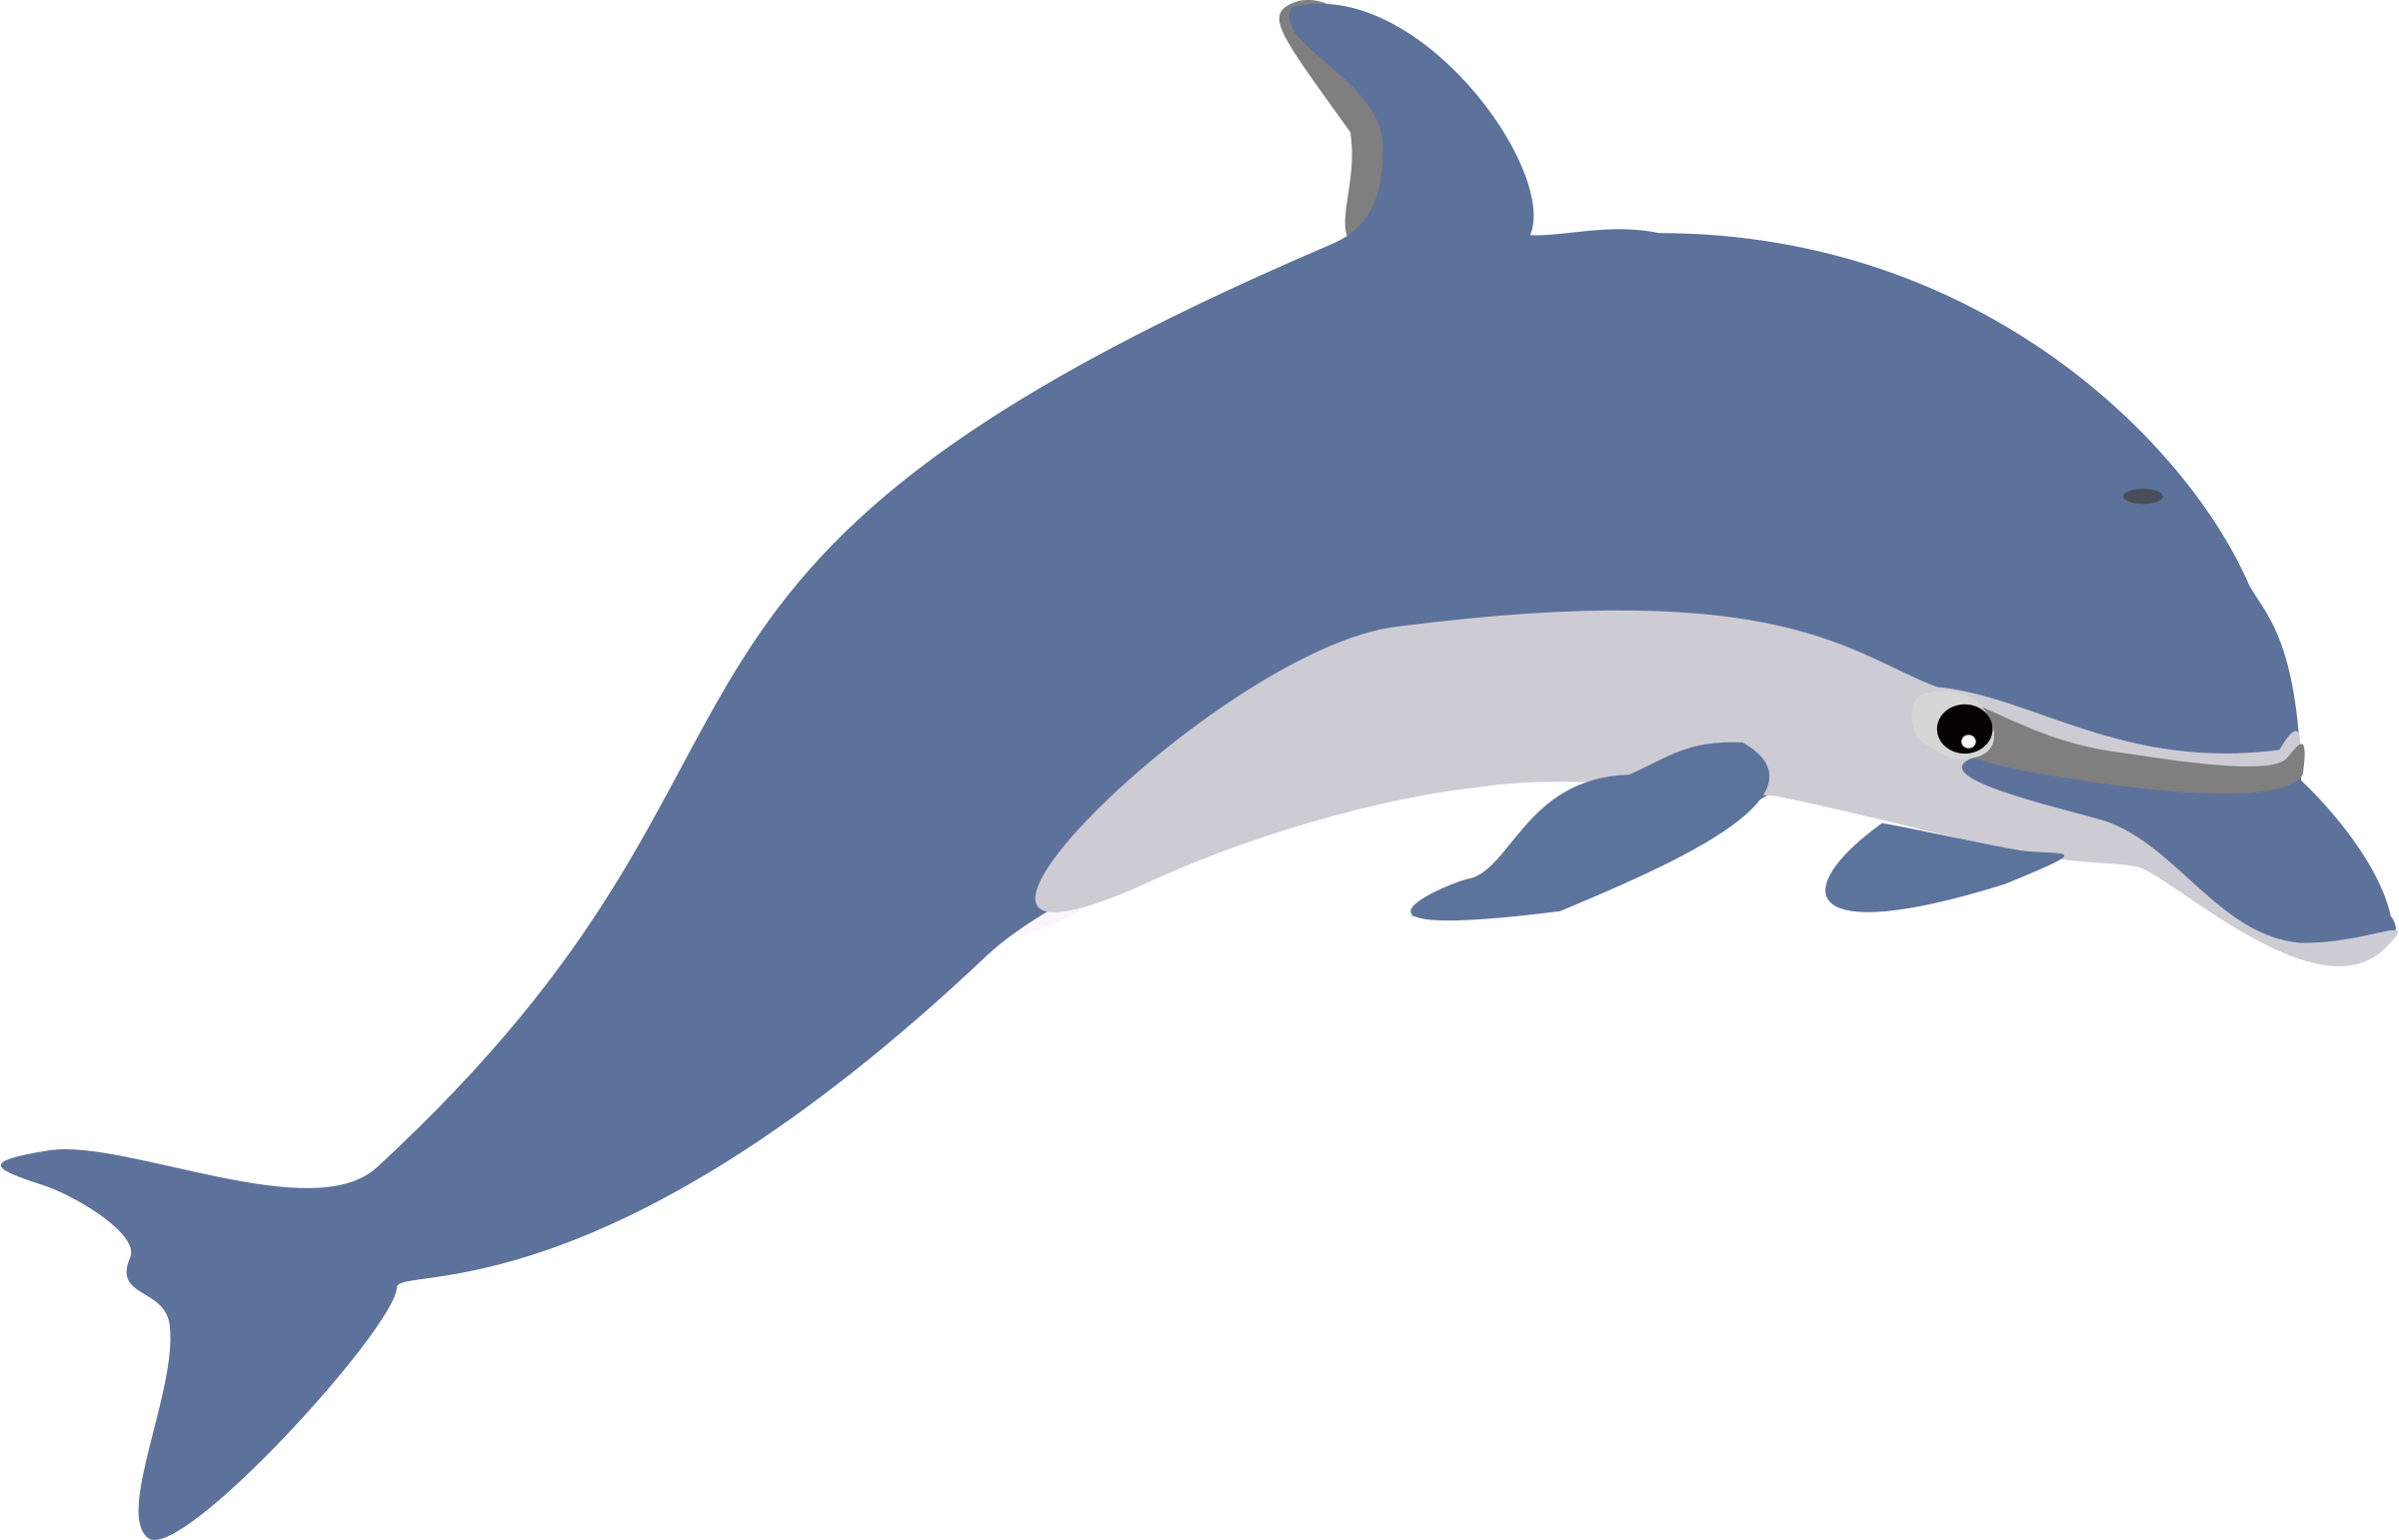 Dolphin Clipart. Dolphin outl